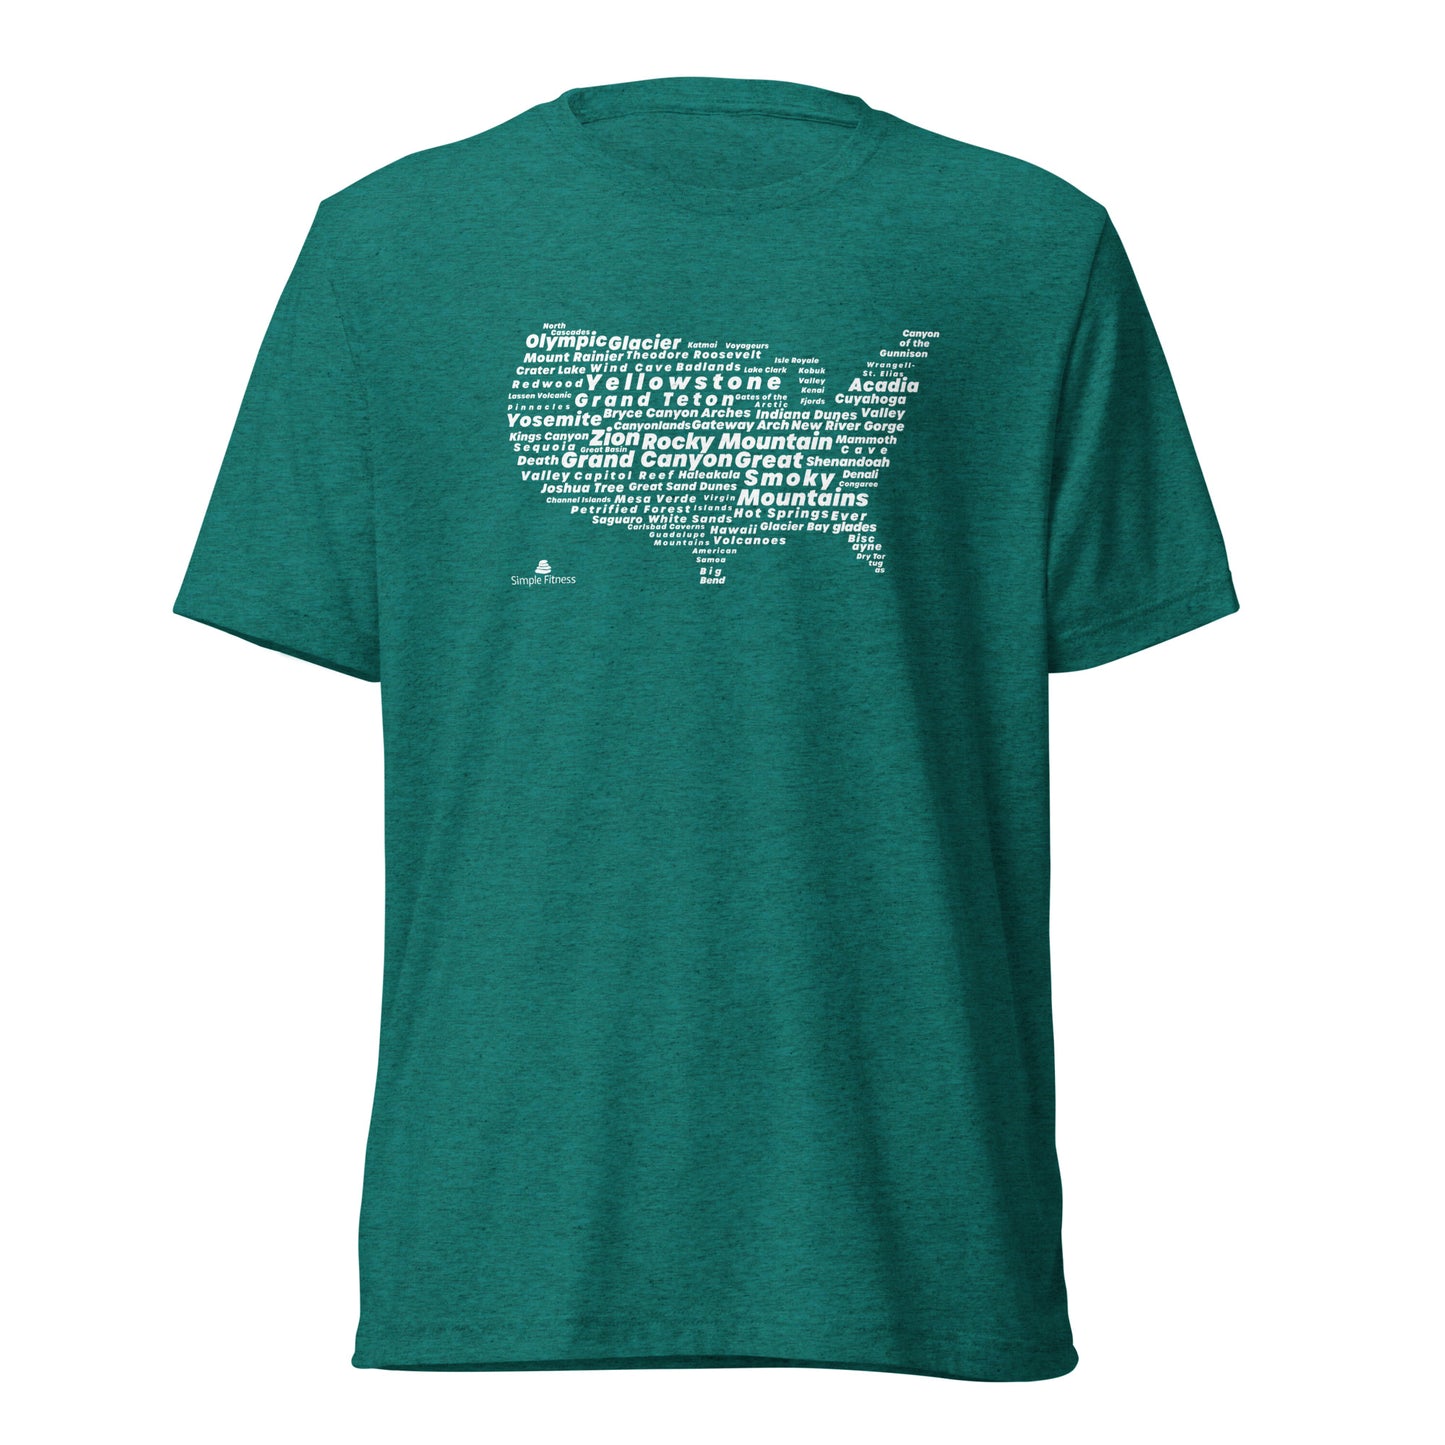 Premium Everyday All National Parks USA Tee